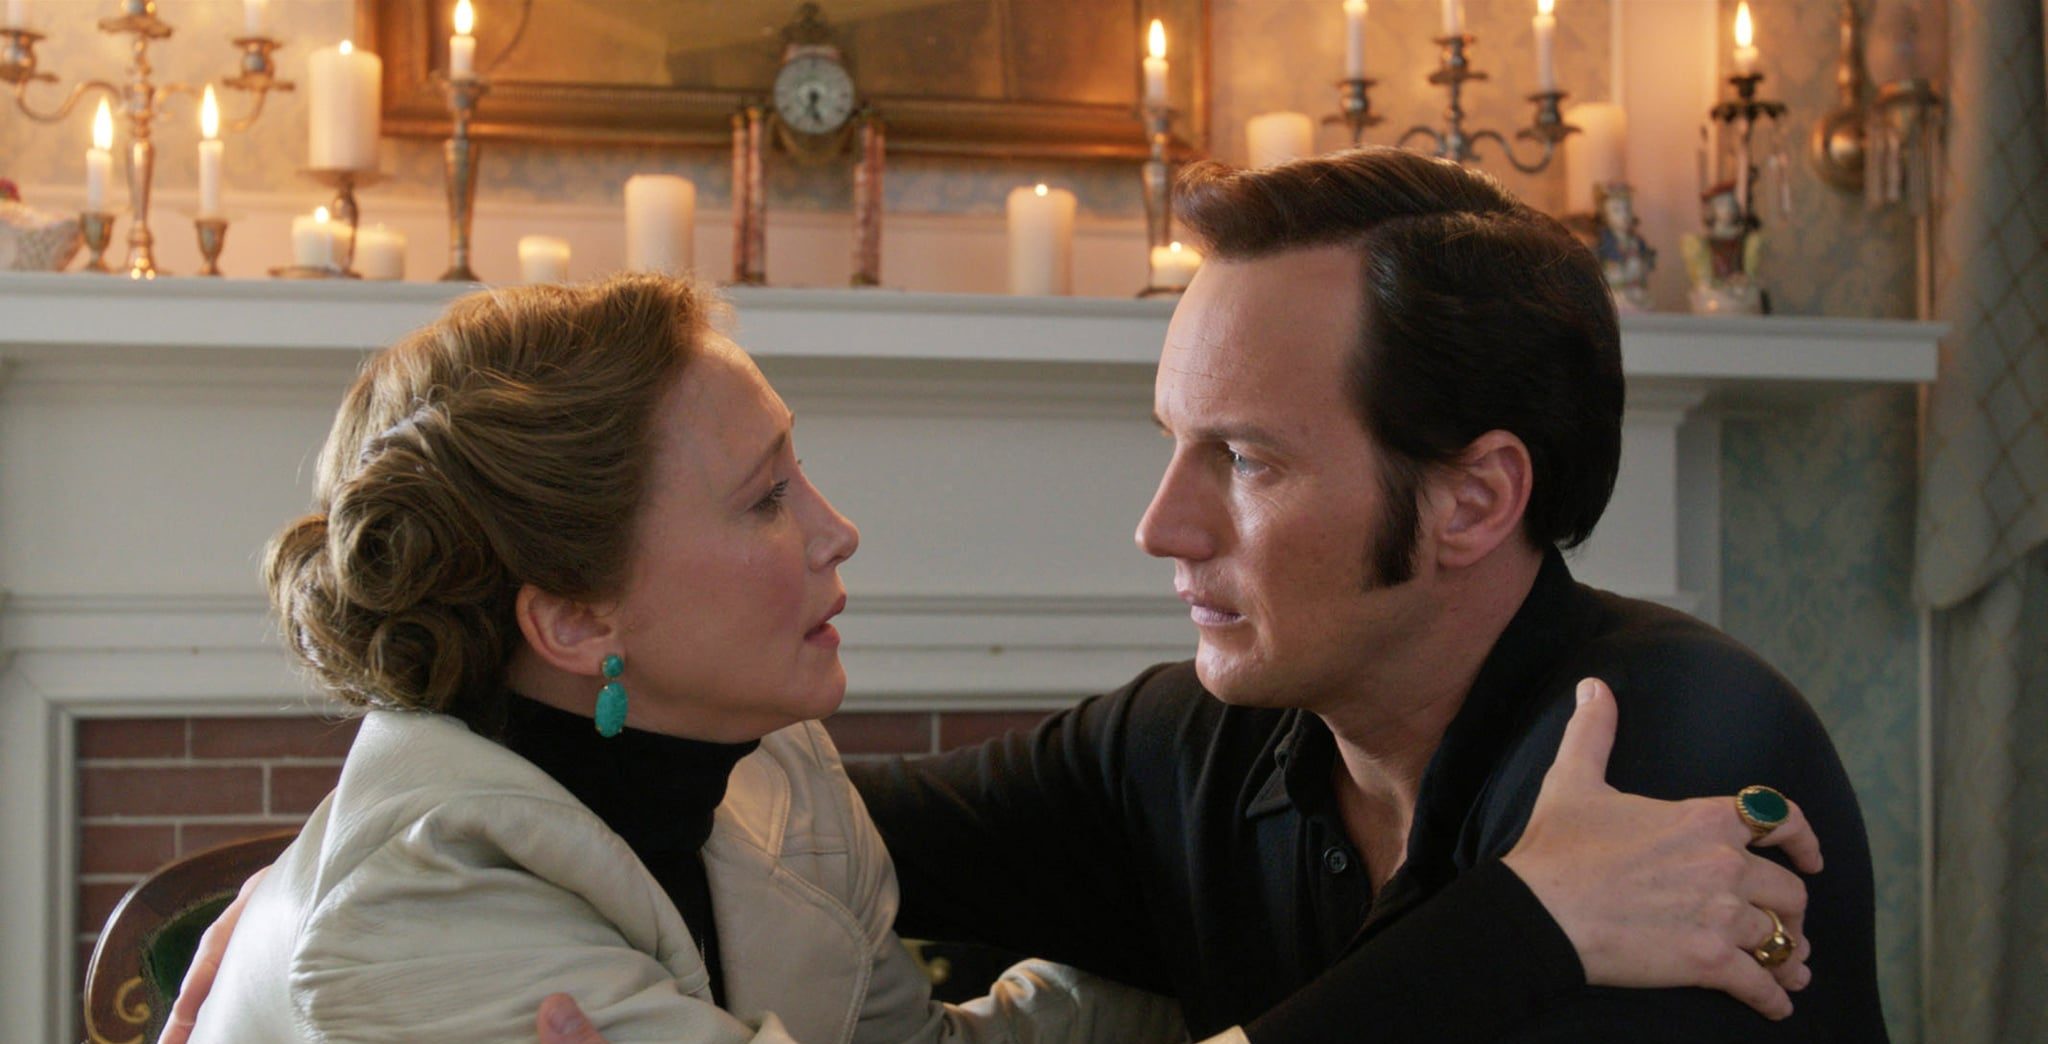 the conjuring 2 full movie online hd with subtitles